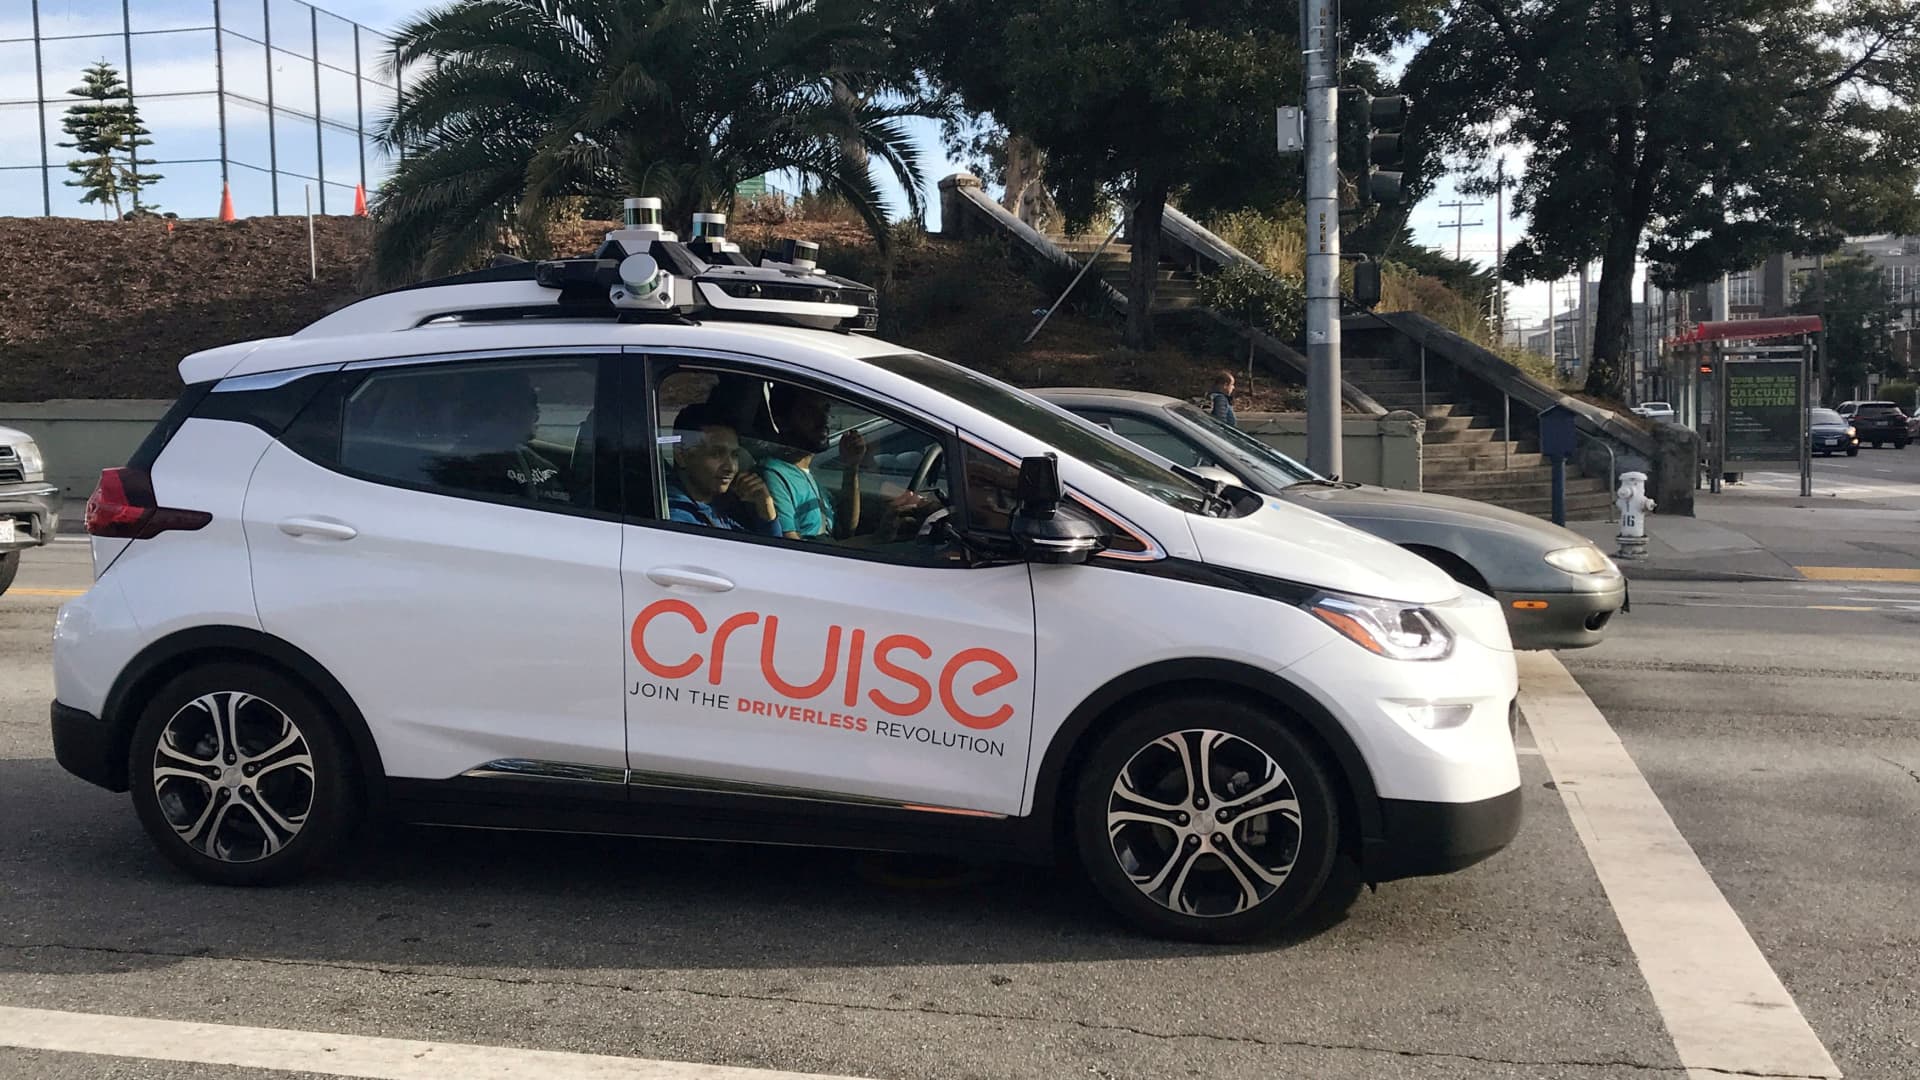 In San Francisco, a car hit a pedestrian and threw him under the wheels of the Cruise robot car